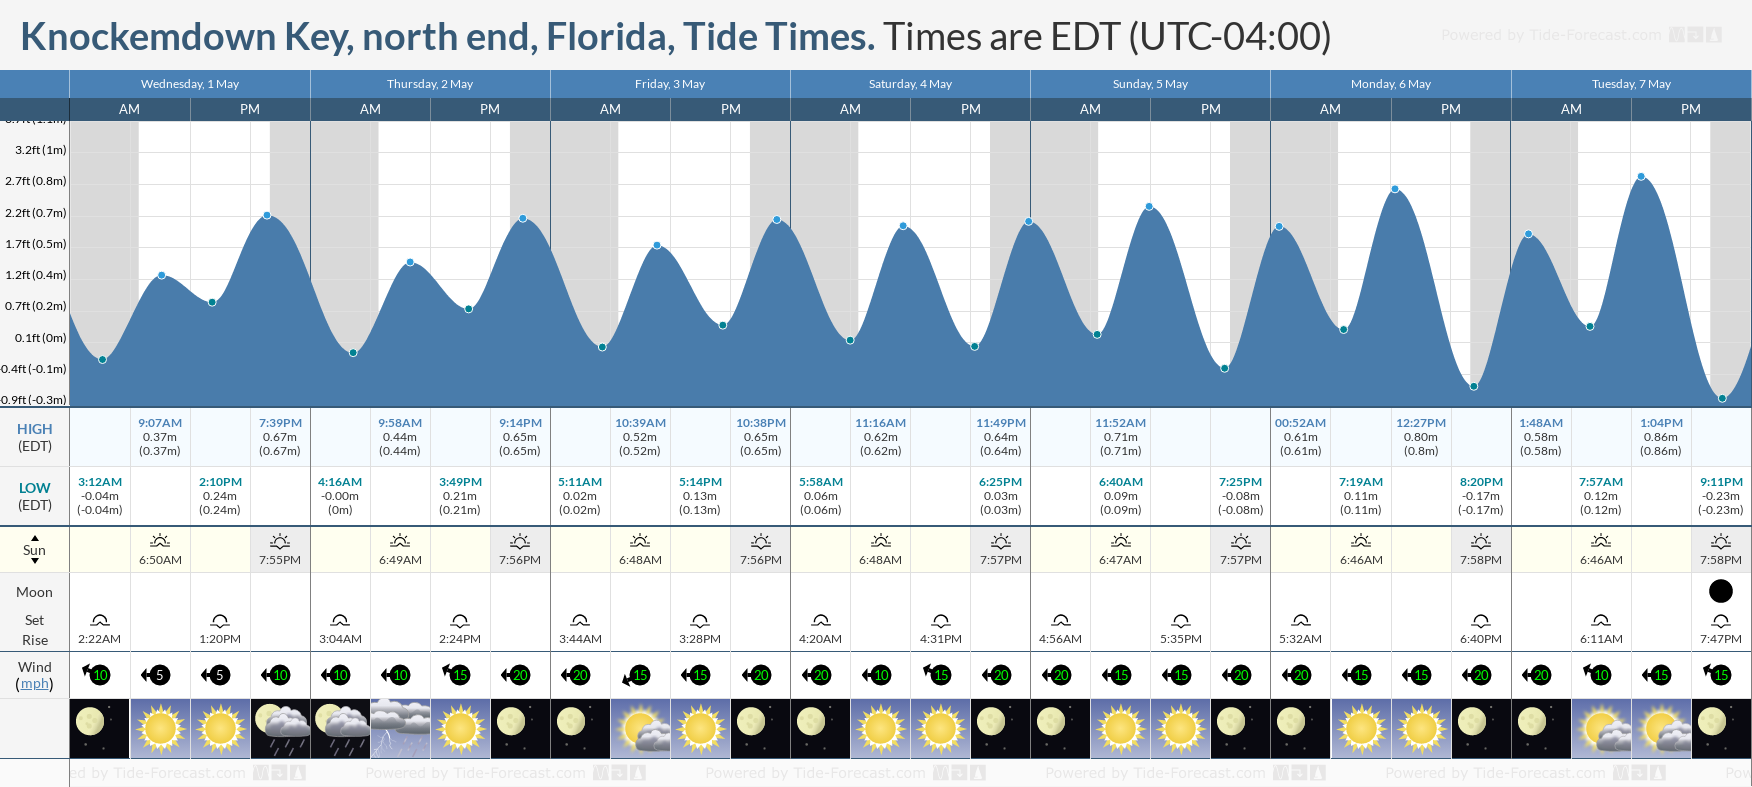 Knockemdown Key, north end, Florida Tide Chart including high and low tide times for the next 7 days